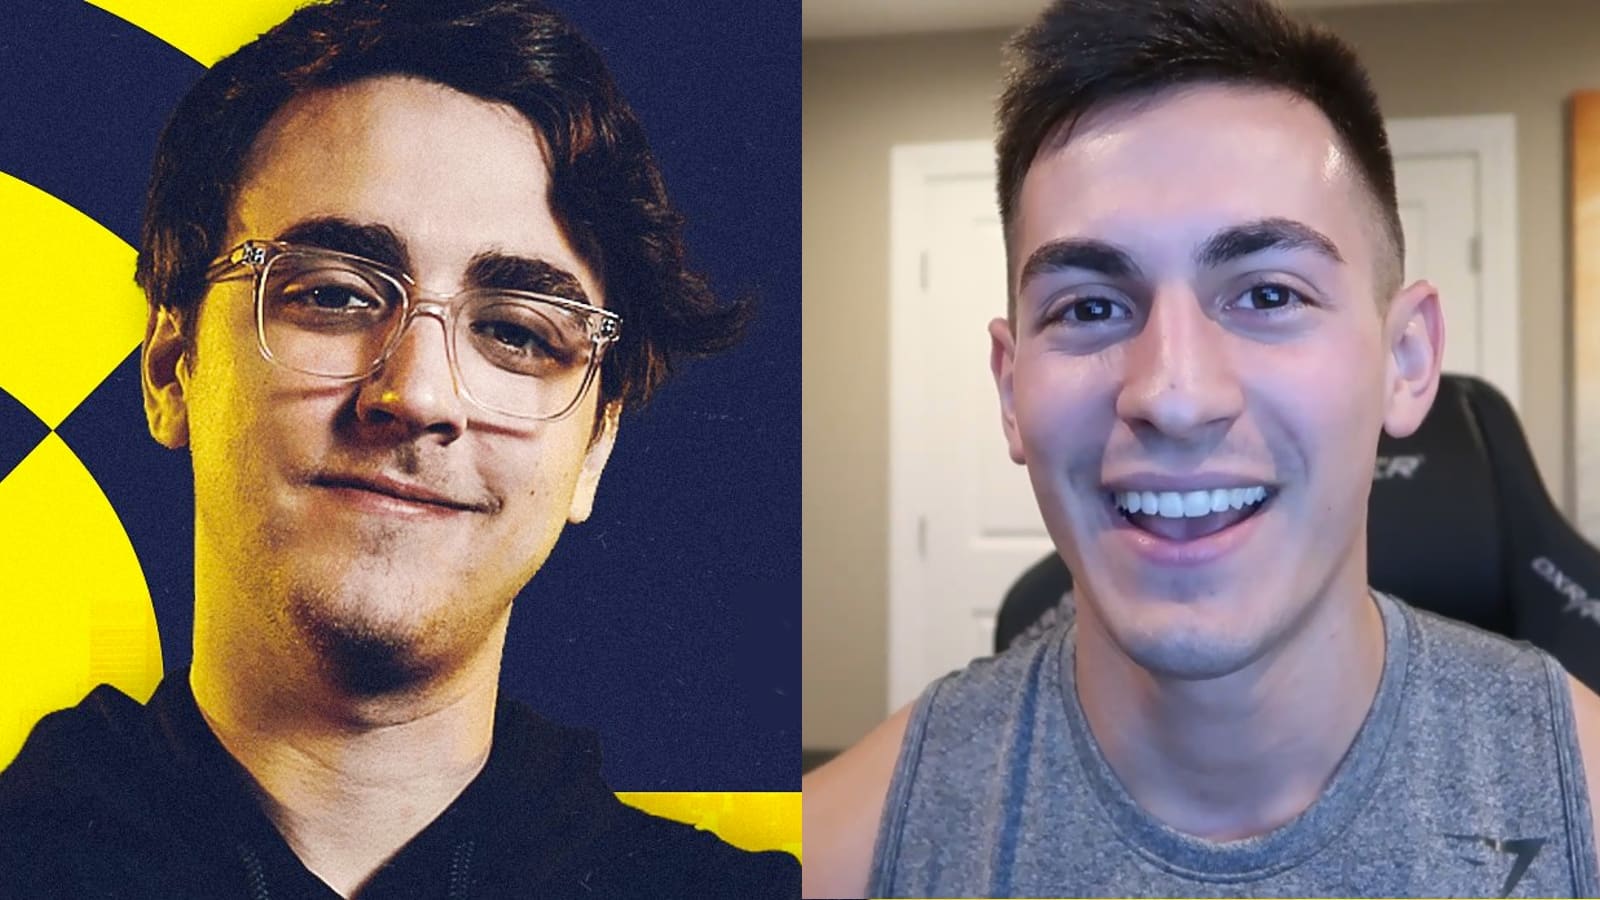 Clayster and Censor side by side